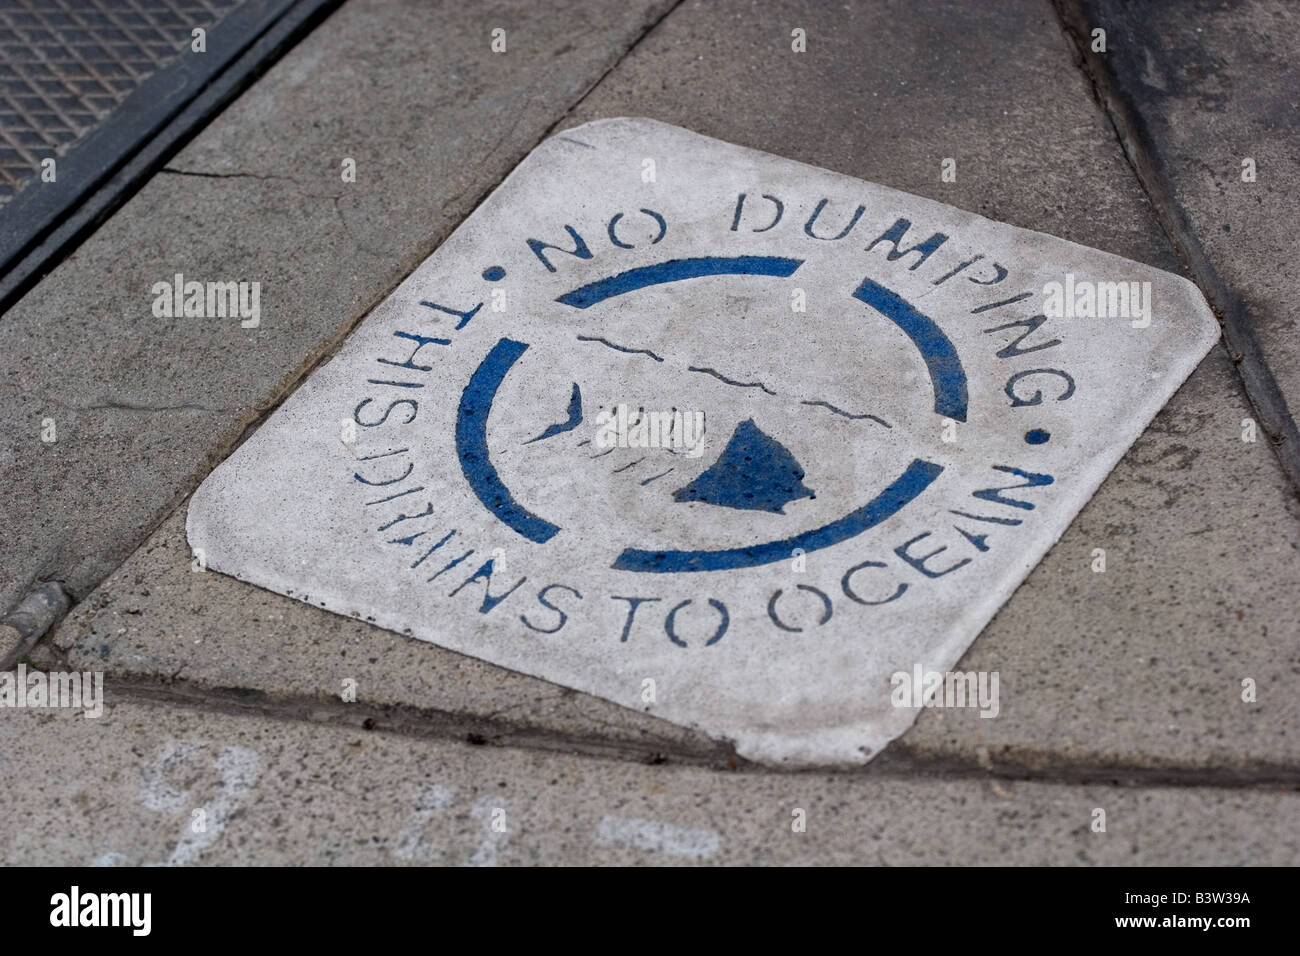 No dumping sign on pavement Stock Photo